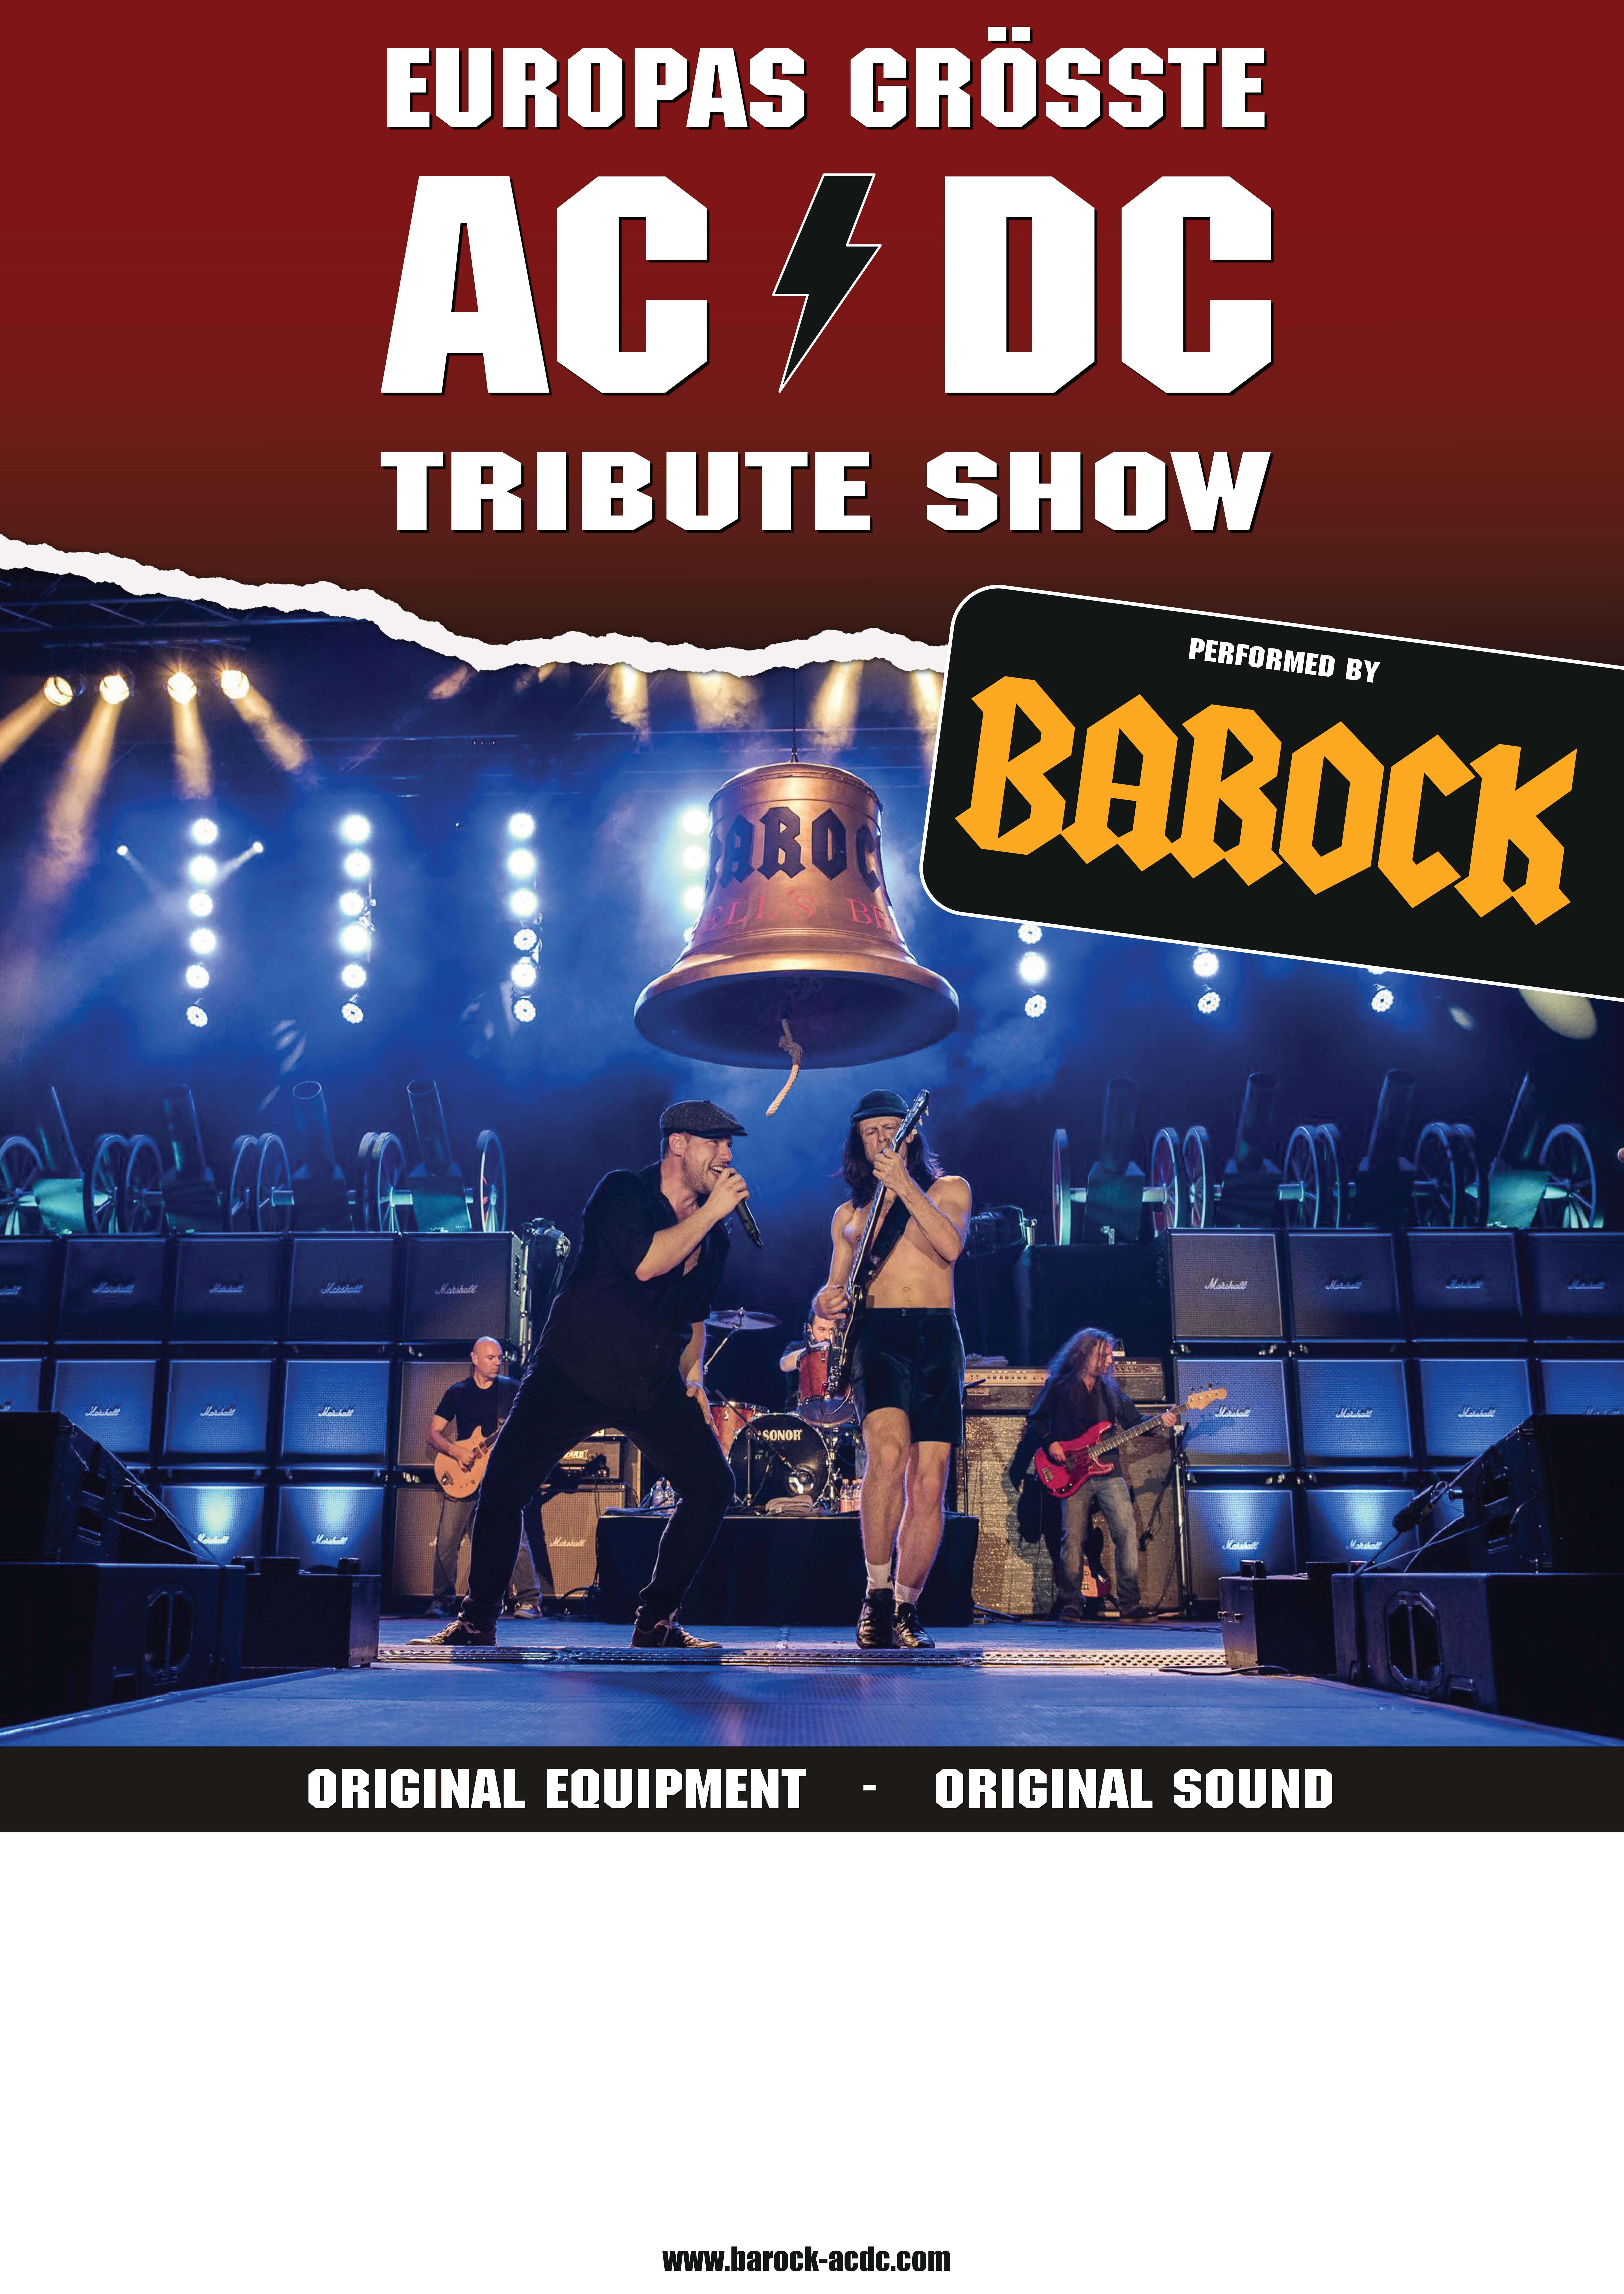 „BAROCK – The AC/DC Tribute Show“